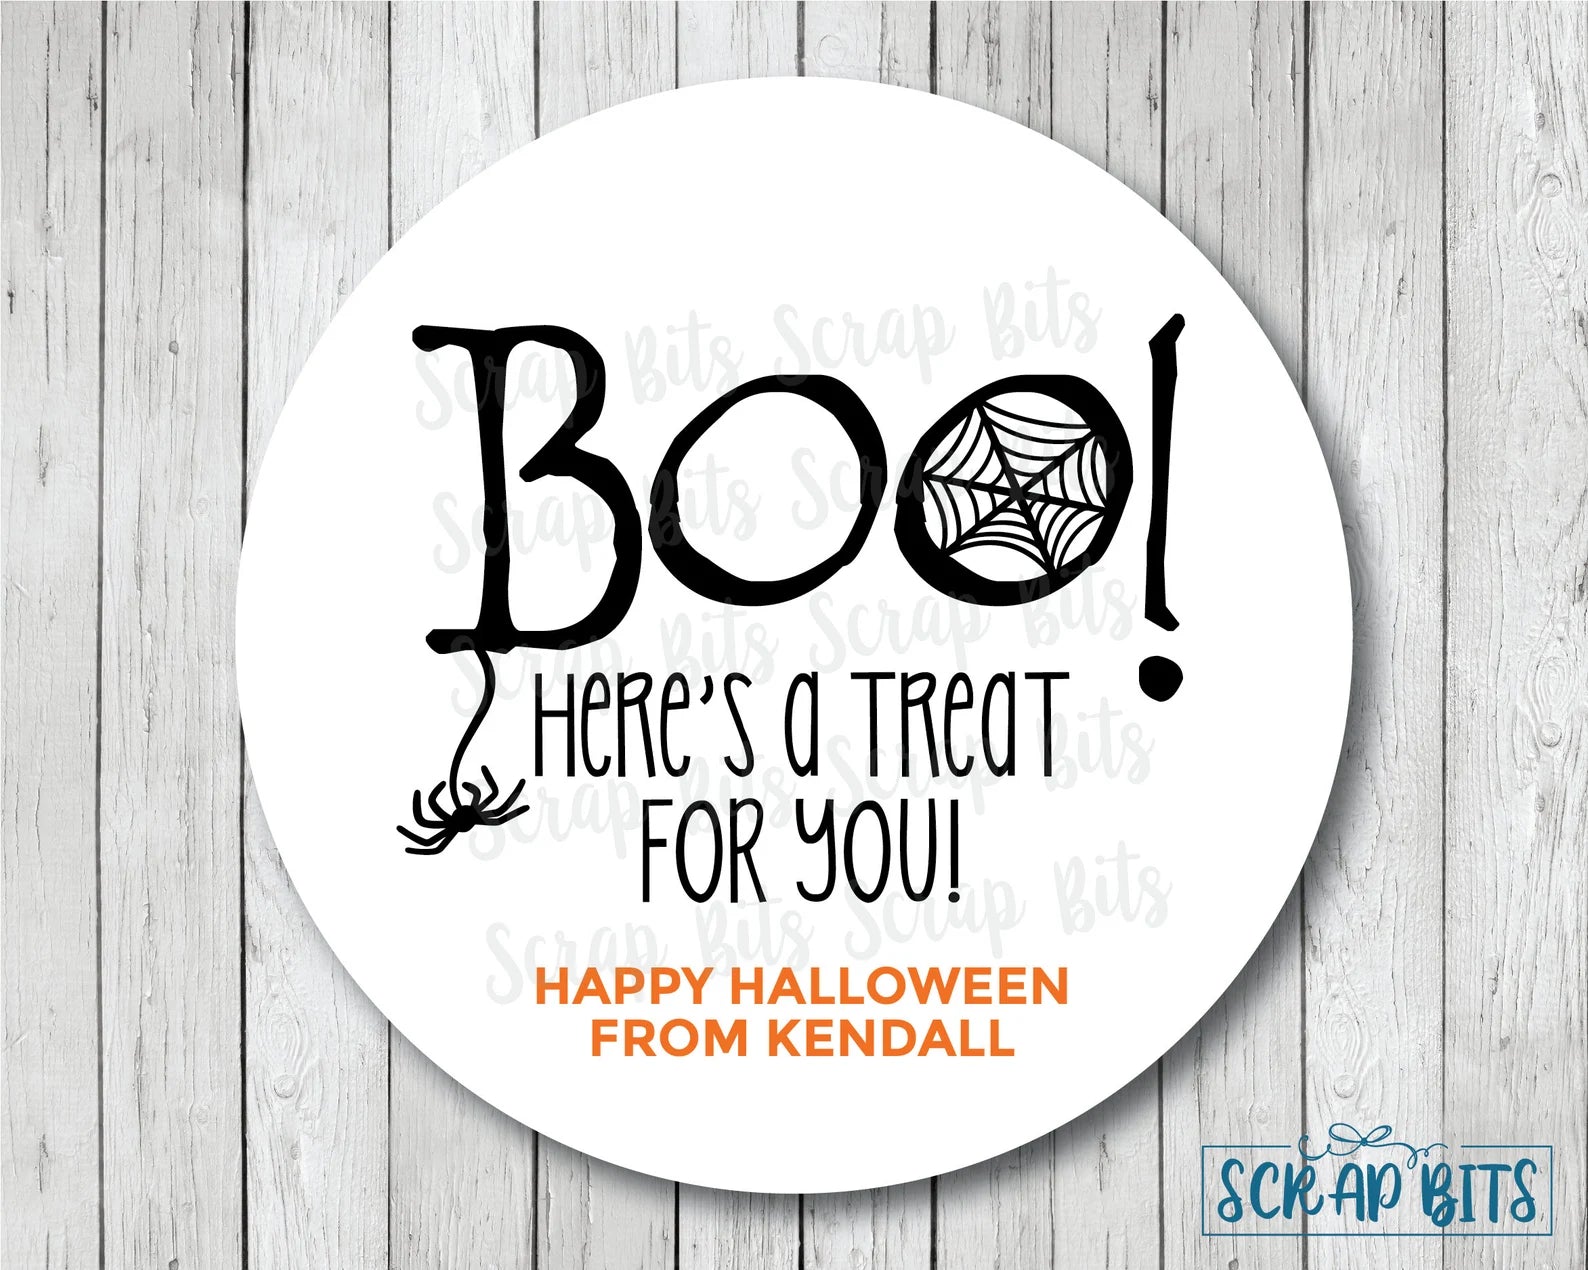 Boo A Treat for You Halloween Stickers or Tags - Scrap Bits